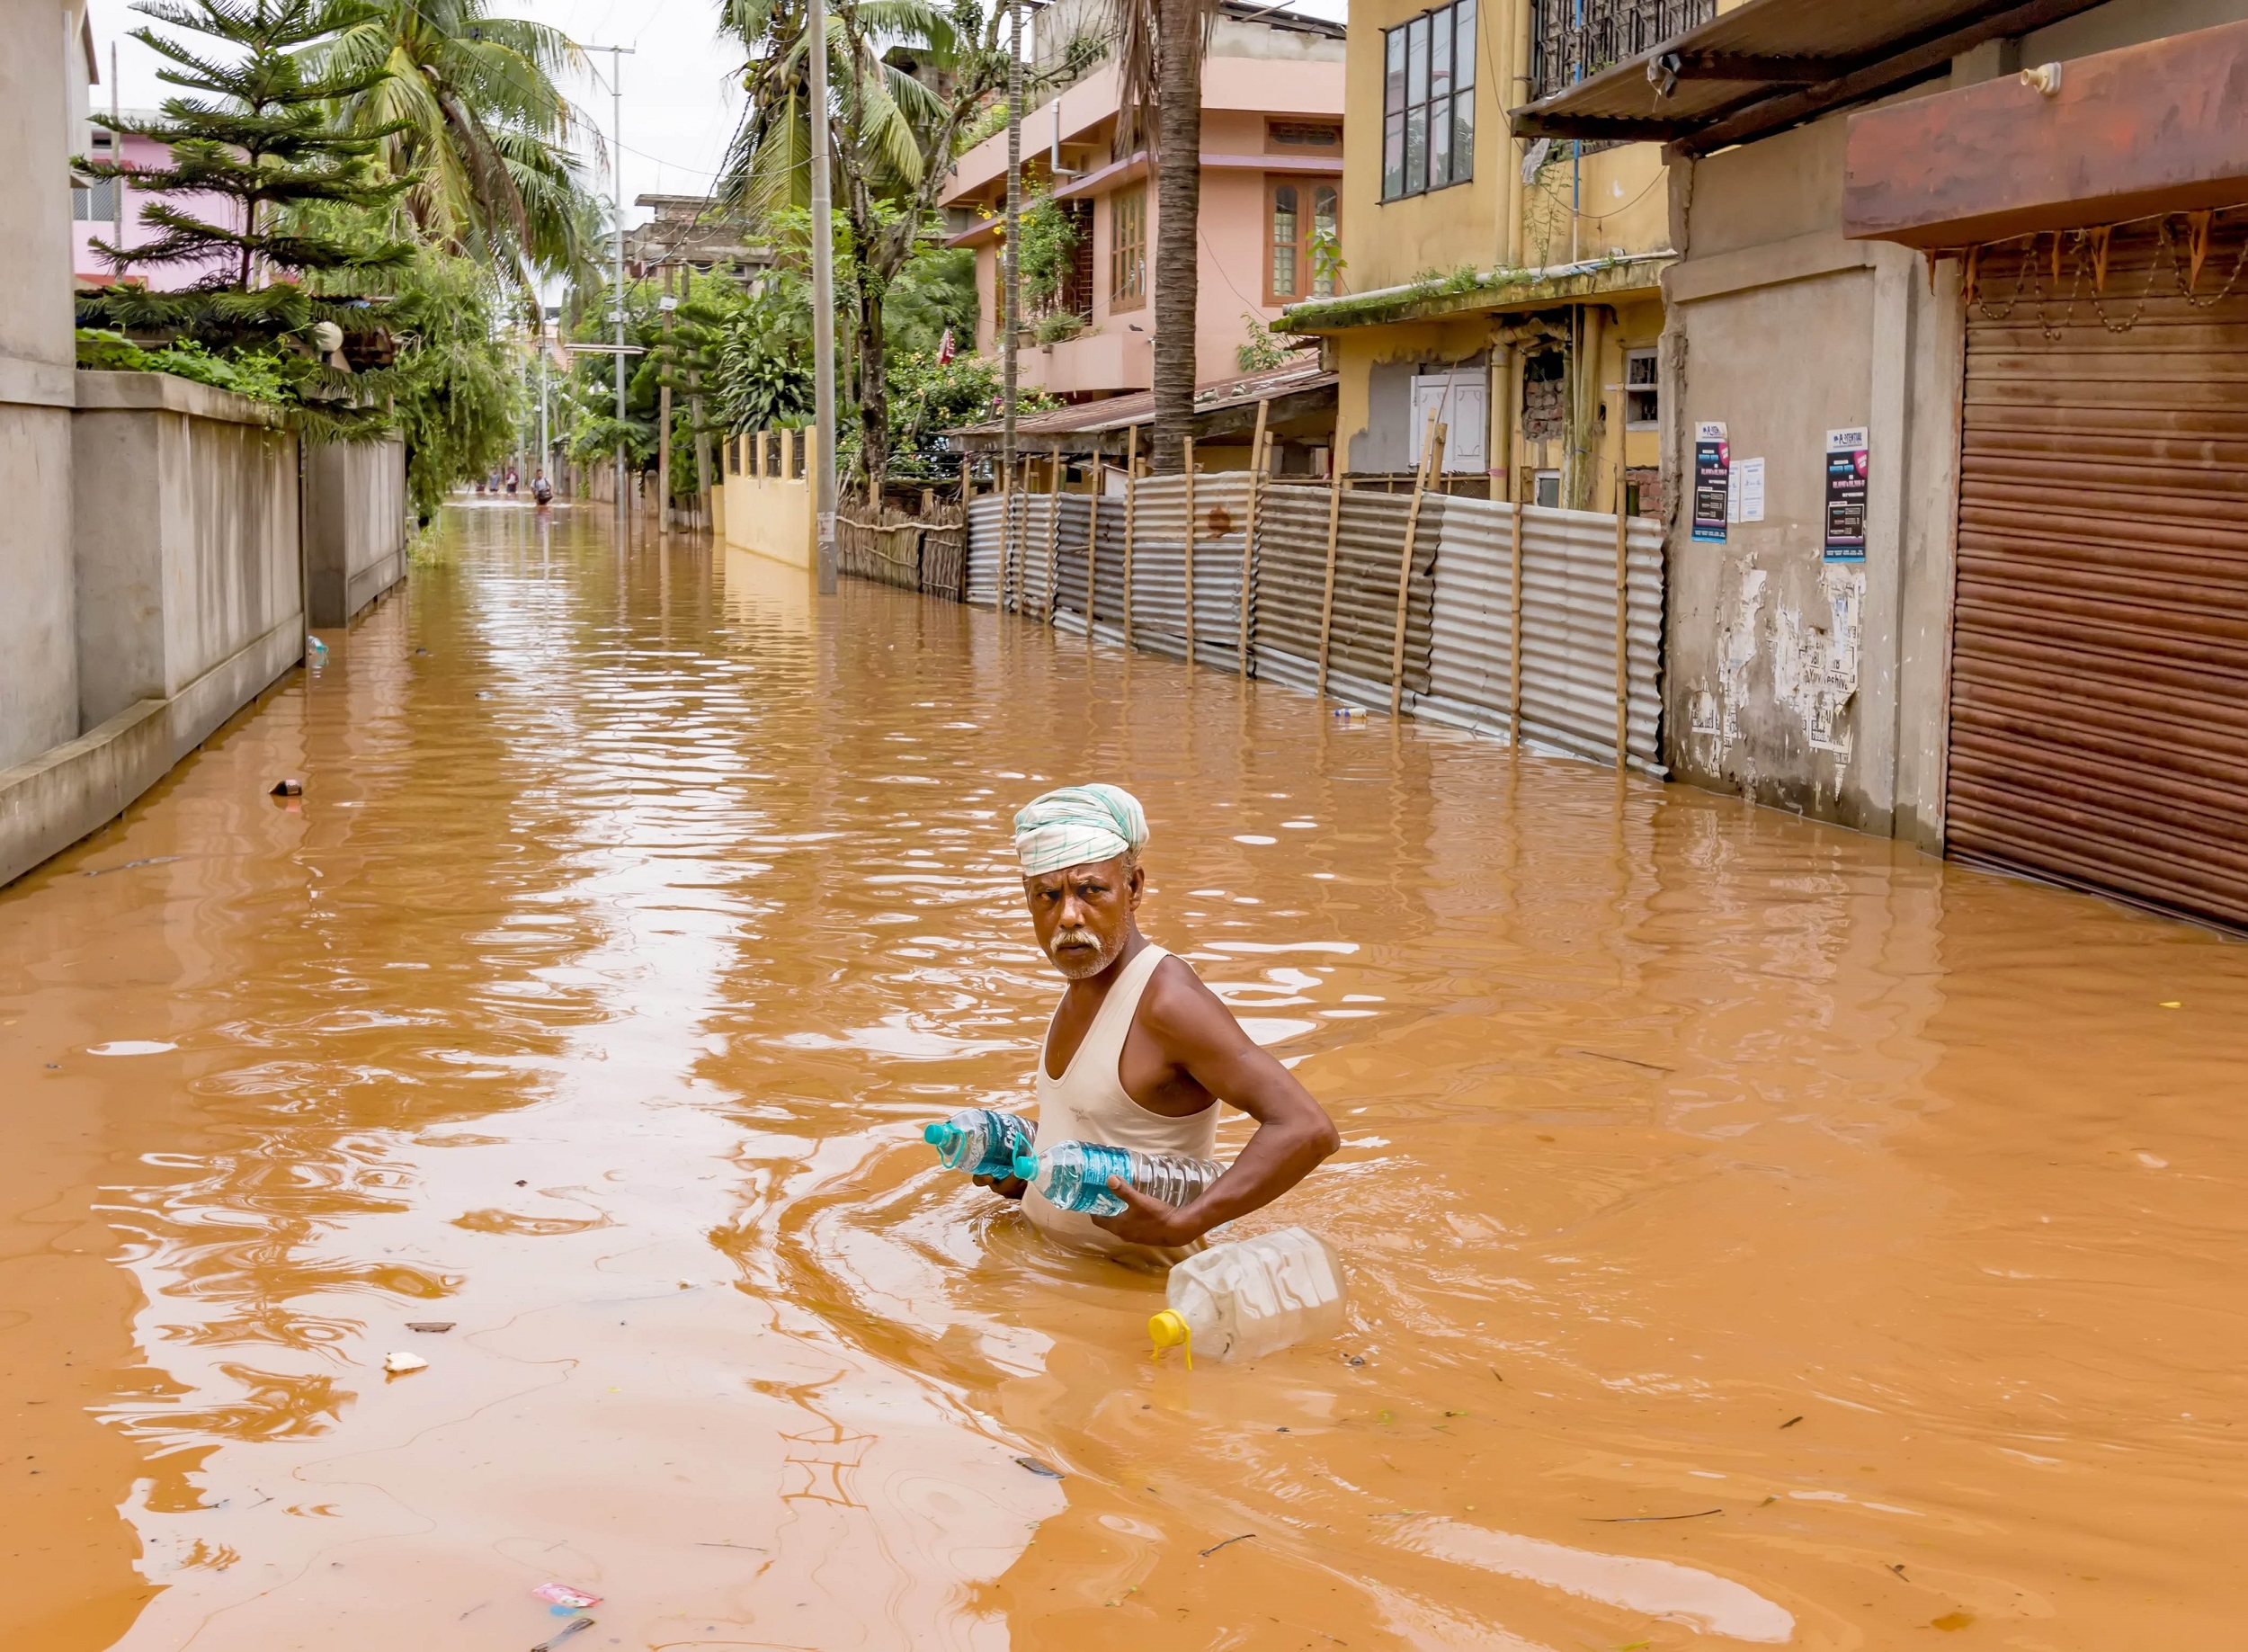 An aged man carries drinking water bottles to his home; which were provided by the relief team during flood on 7th July 7, 2016 at Anil Nagar, Guwahati [image: Vikramjit Kakati India/ZUMA Wire/Alamy Live News]